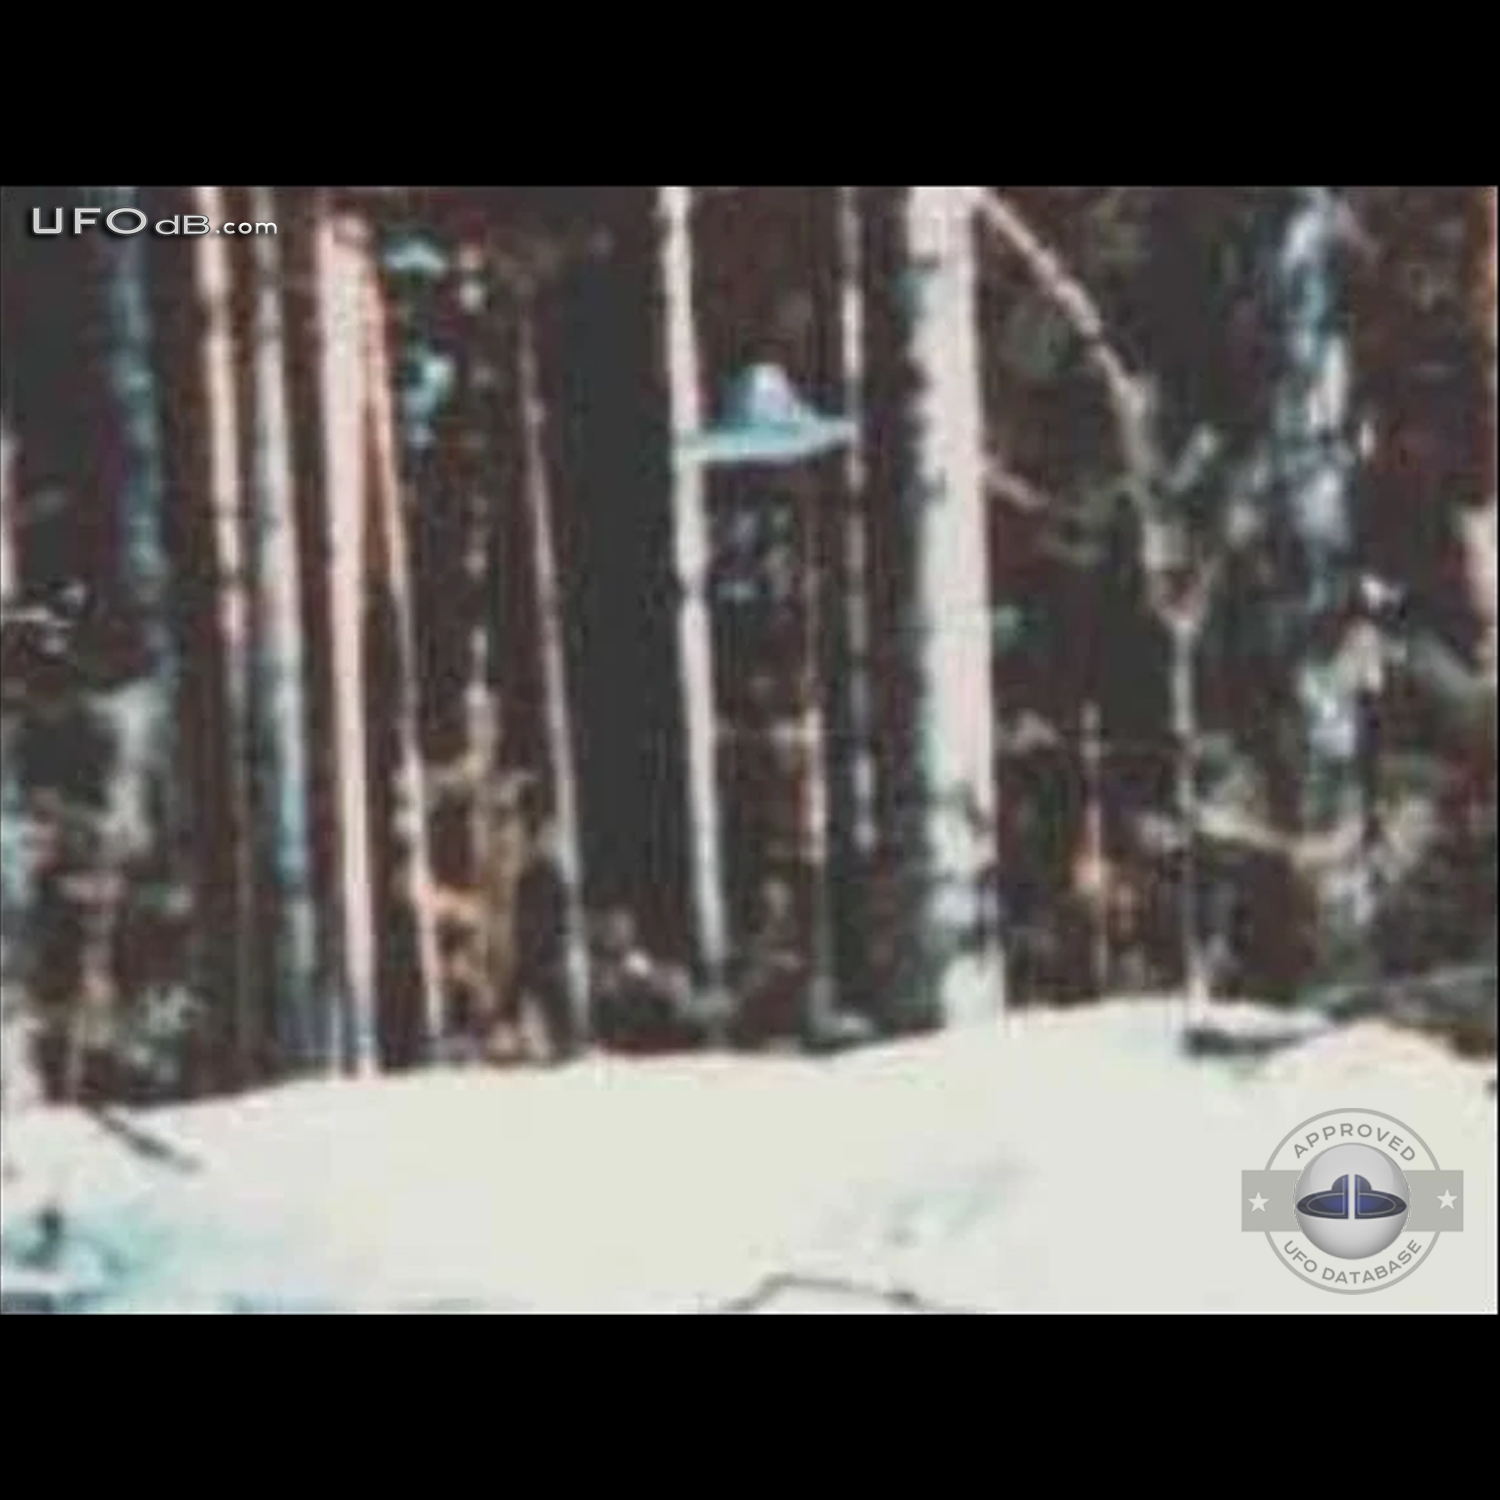 Suonenjoki UFO probe going around trees in the forest | March 16 1979 UFO Picture #336-1